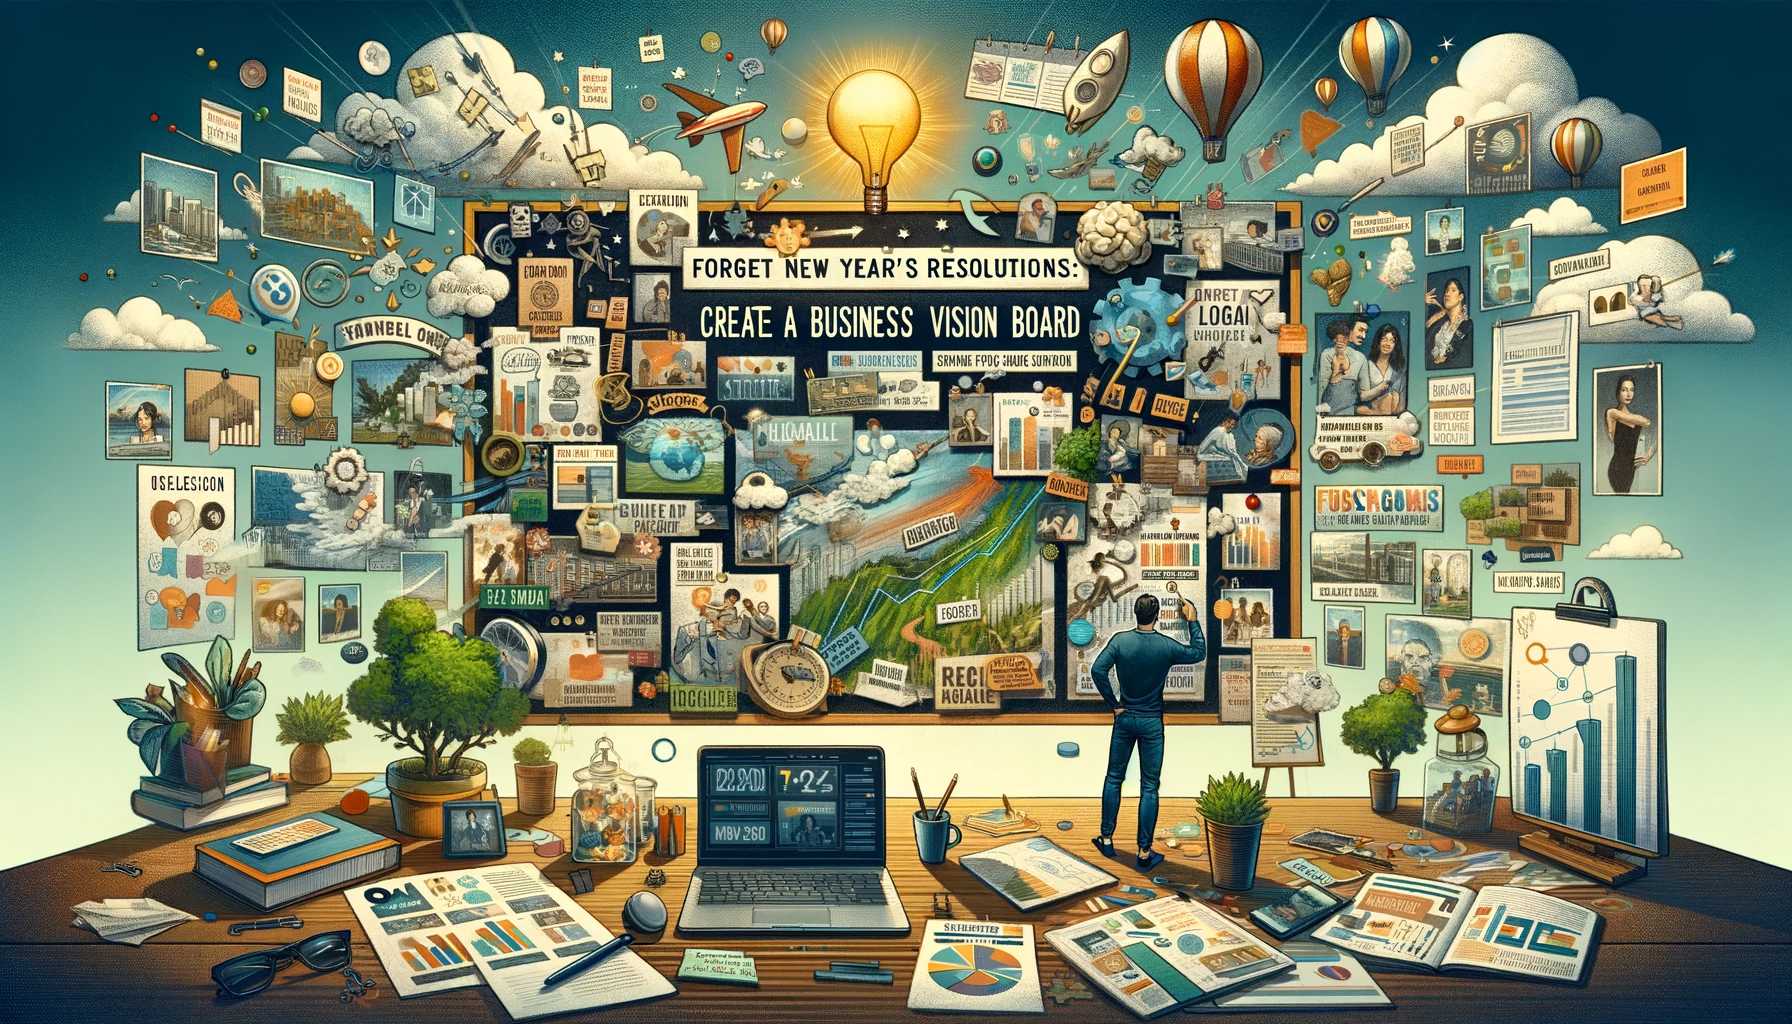 Forget New Year’s Resolutions: Create a Business Vision Board